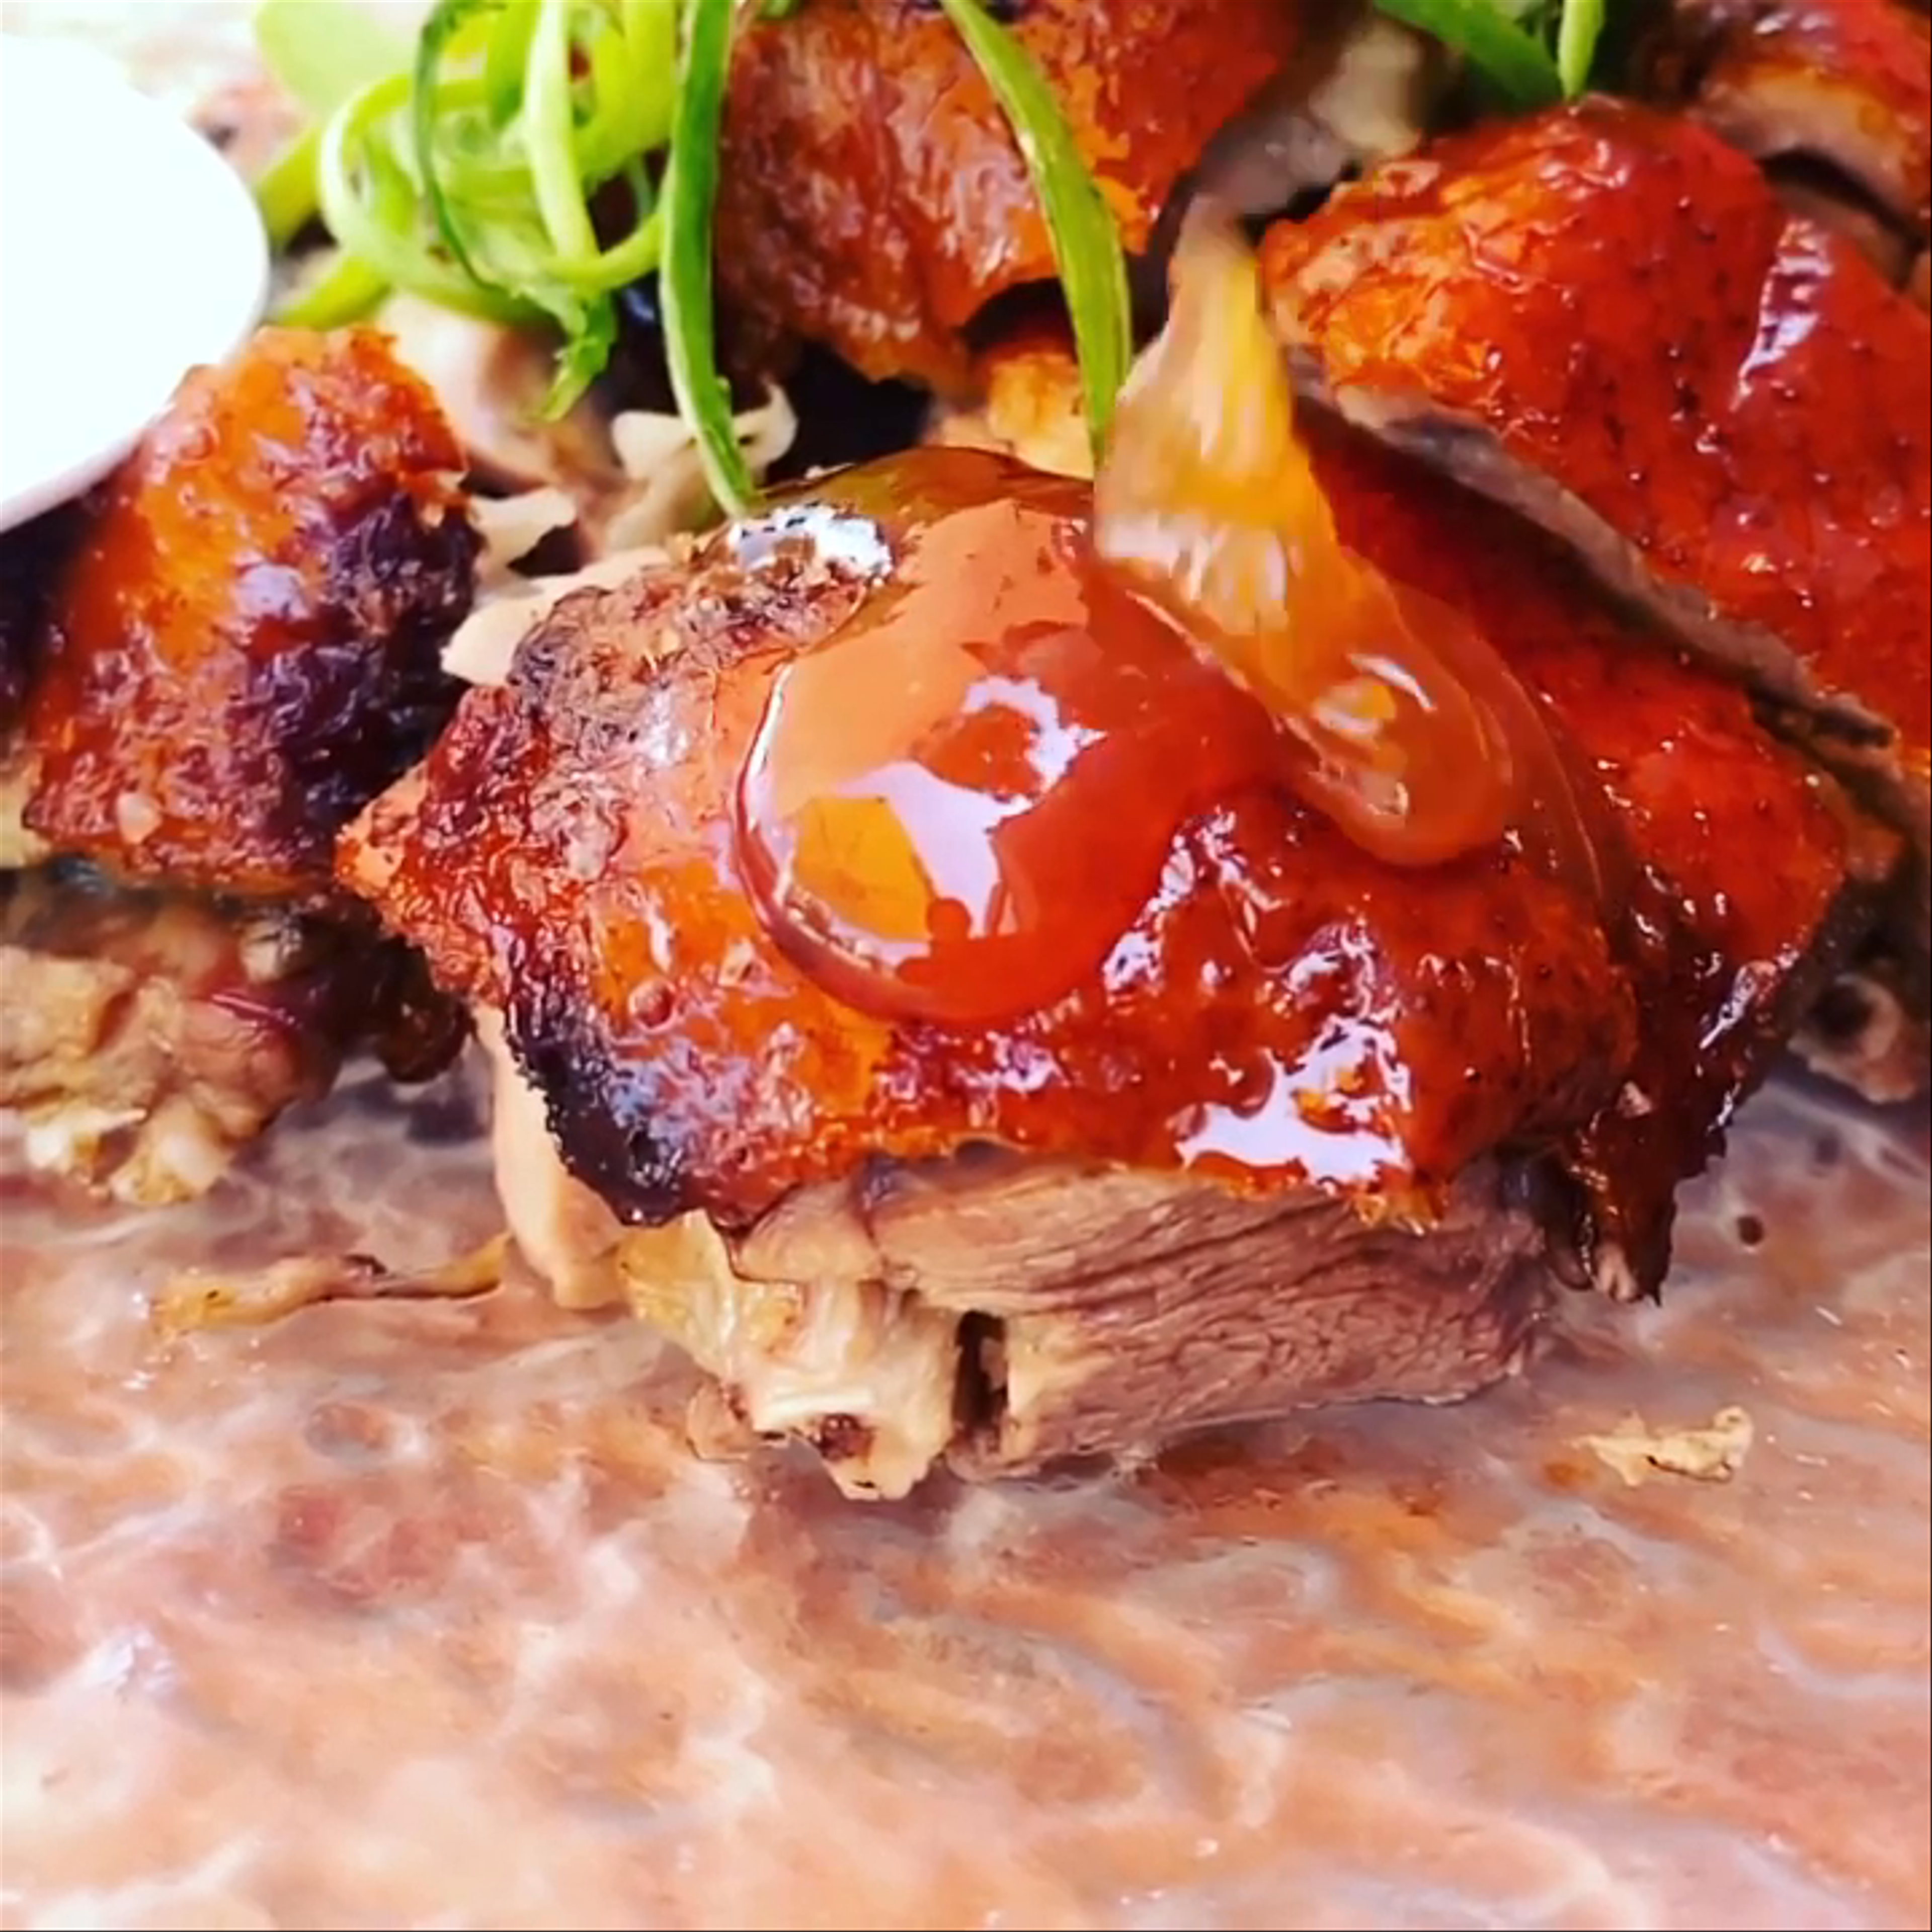 Roasted Half Duck dish at Bao Dim Sum House in Los Angeles